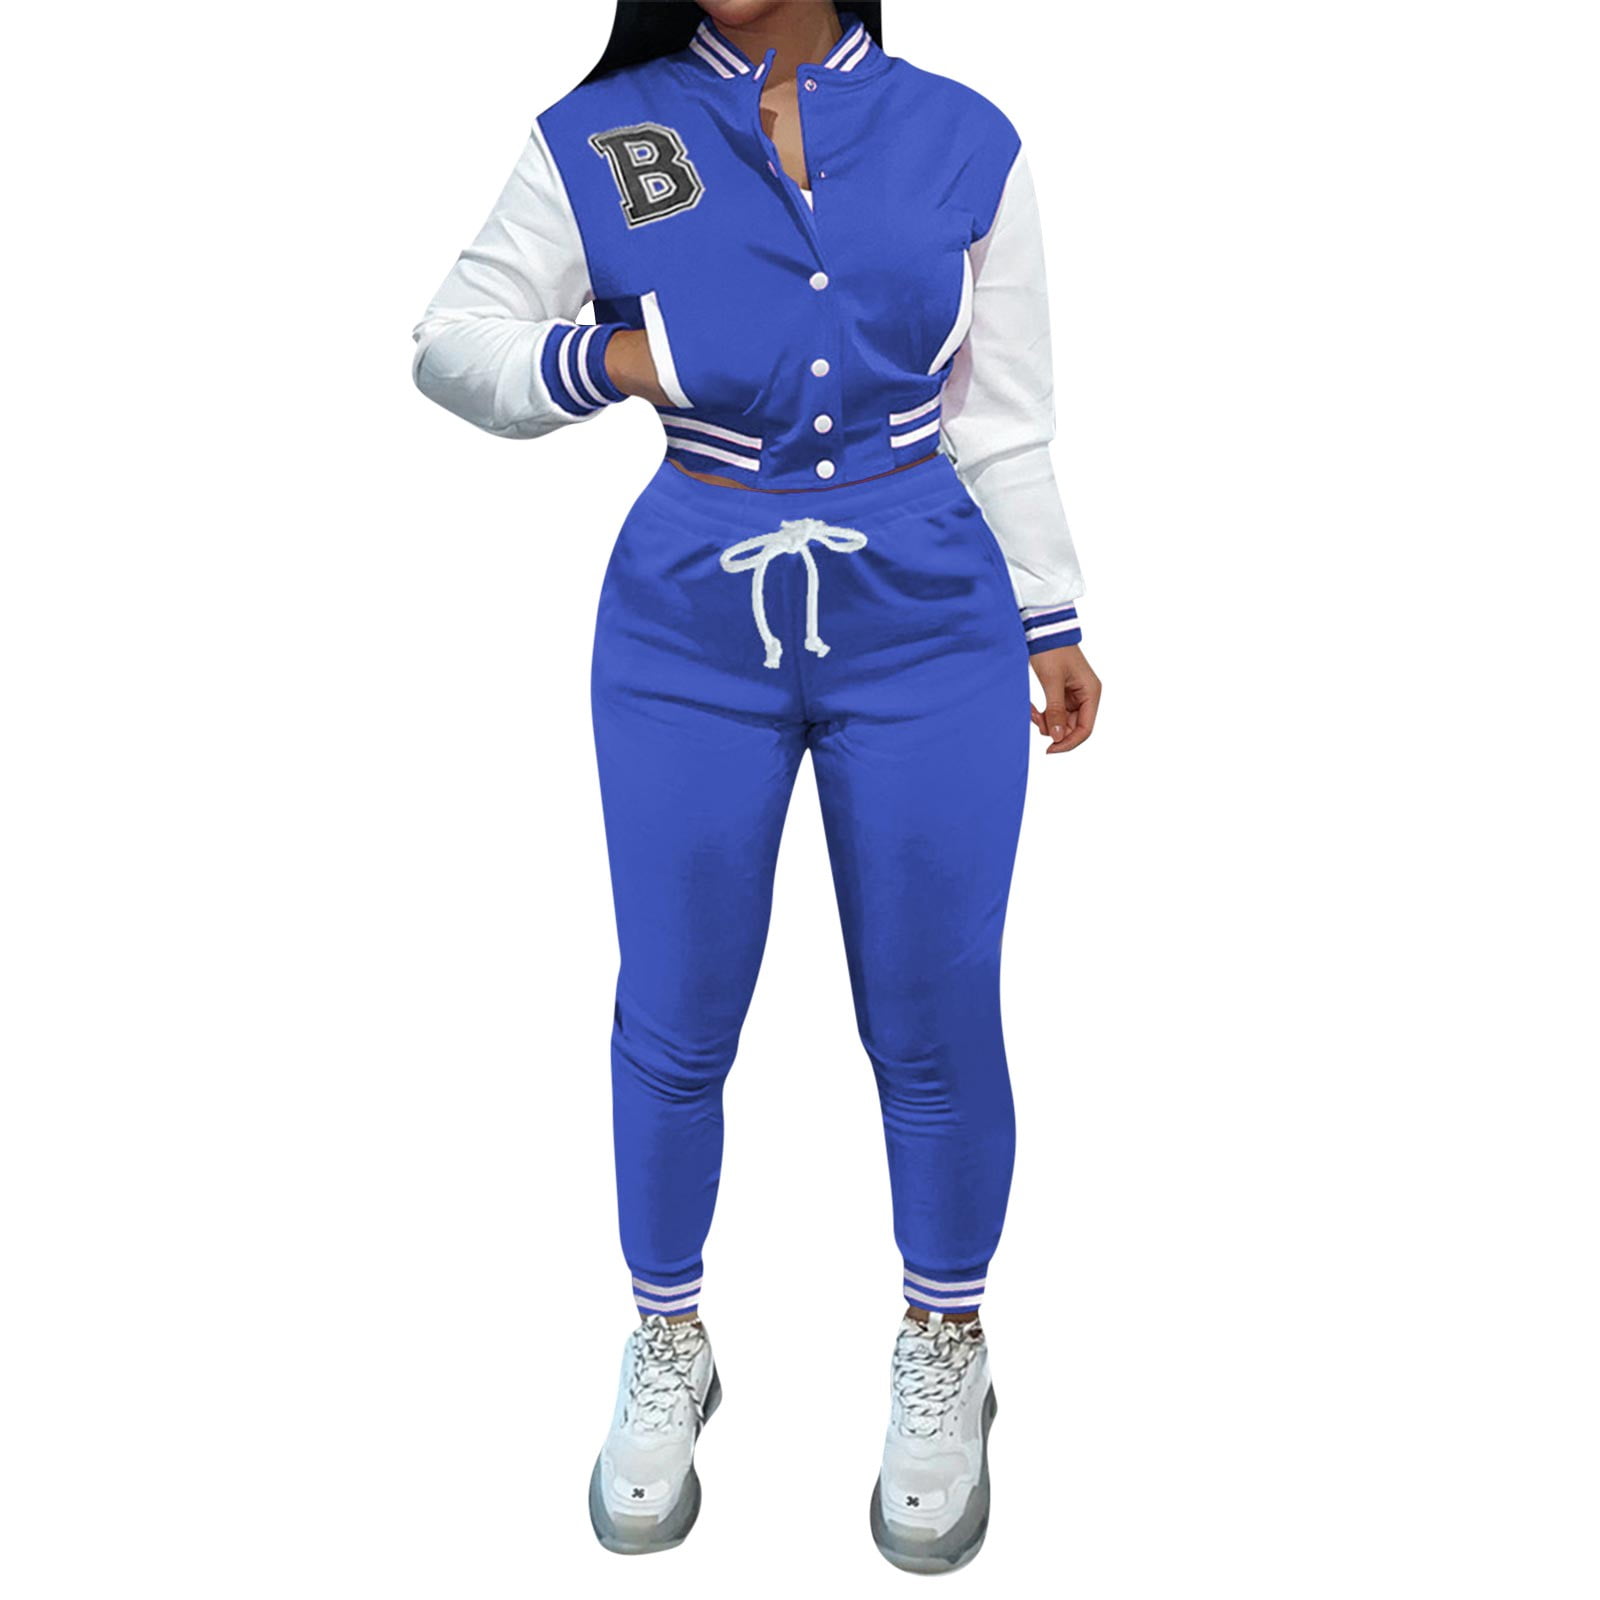 PMUYBHF Vacation Outfits for Women Plus Size 2X Women Autumn Baseball Suit  Two Piece Set Letter Prints Baseball Tops Jacket Fall and Winter Sweatpants  Jogger Set Sweatsuit Two Piece Wearset 